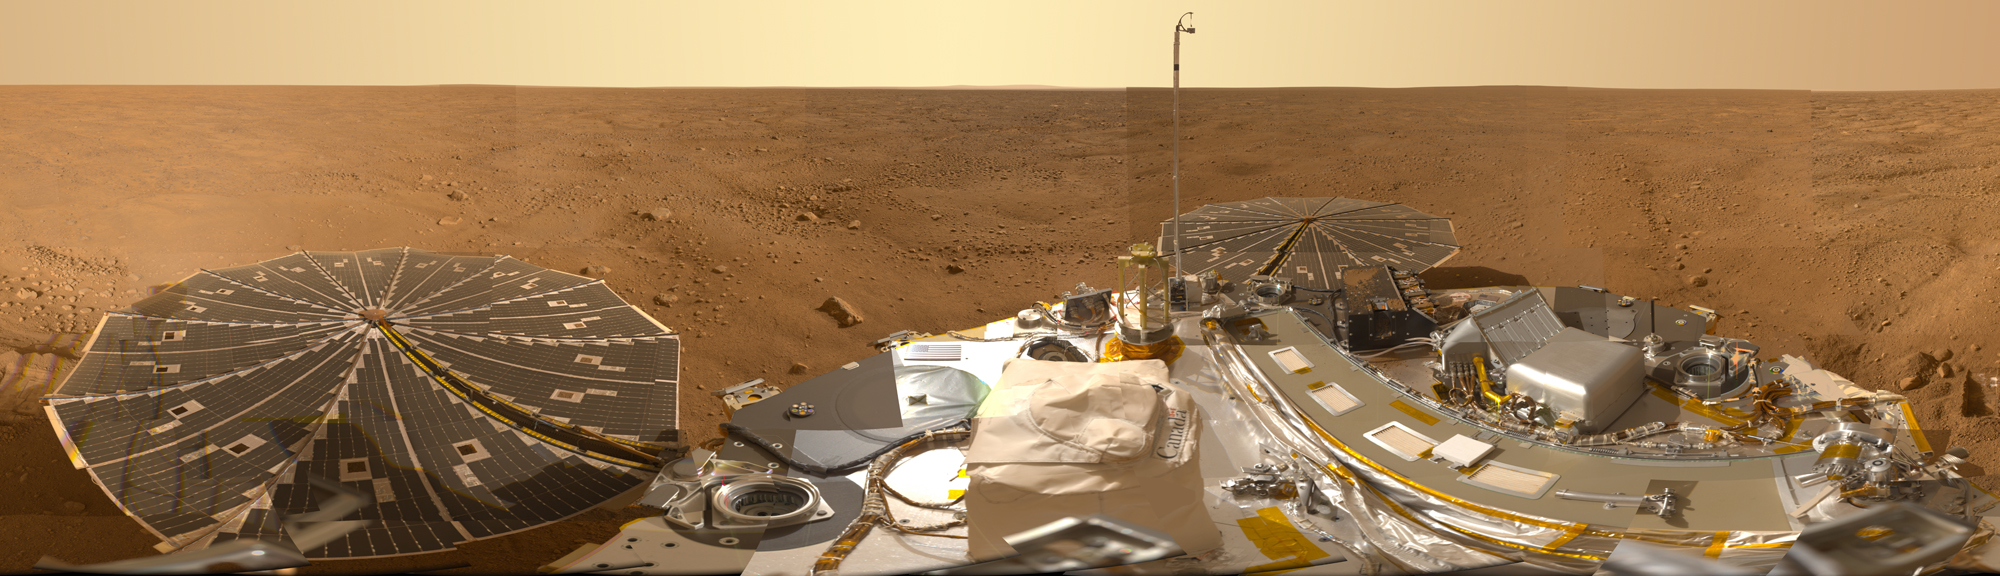 A wide, flat vista on the surface of Mars is visible above the instruments and solar panels of the lander.